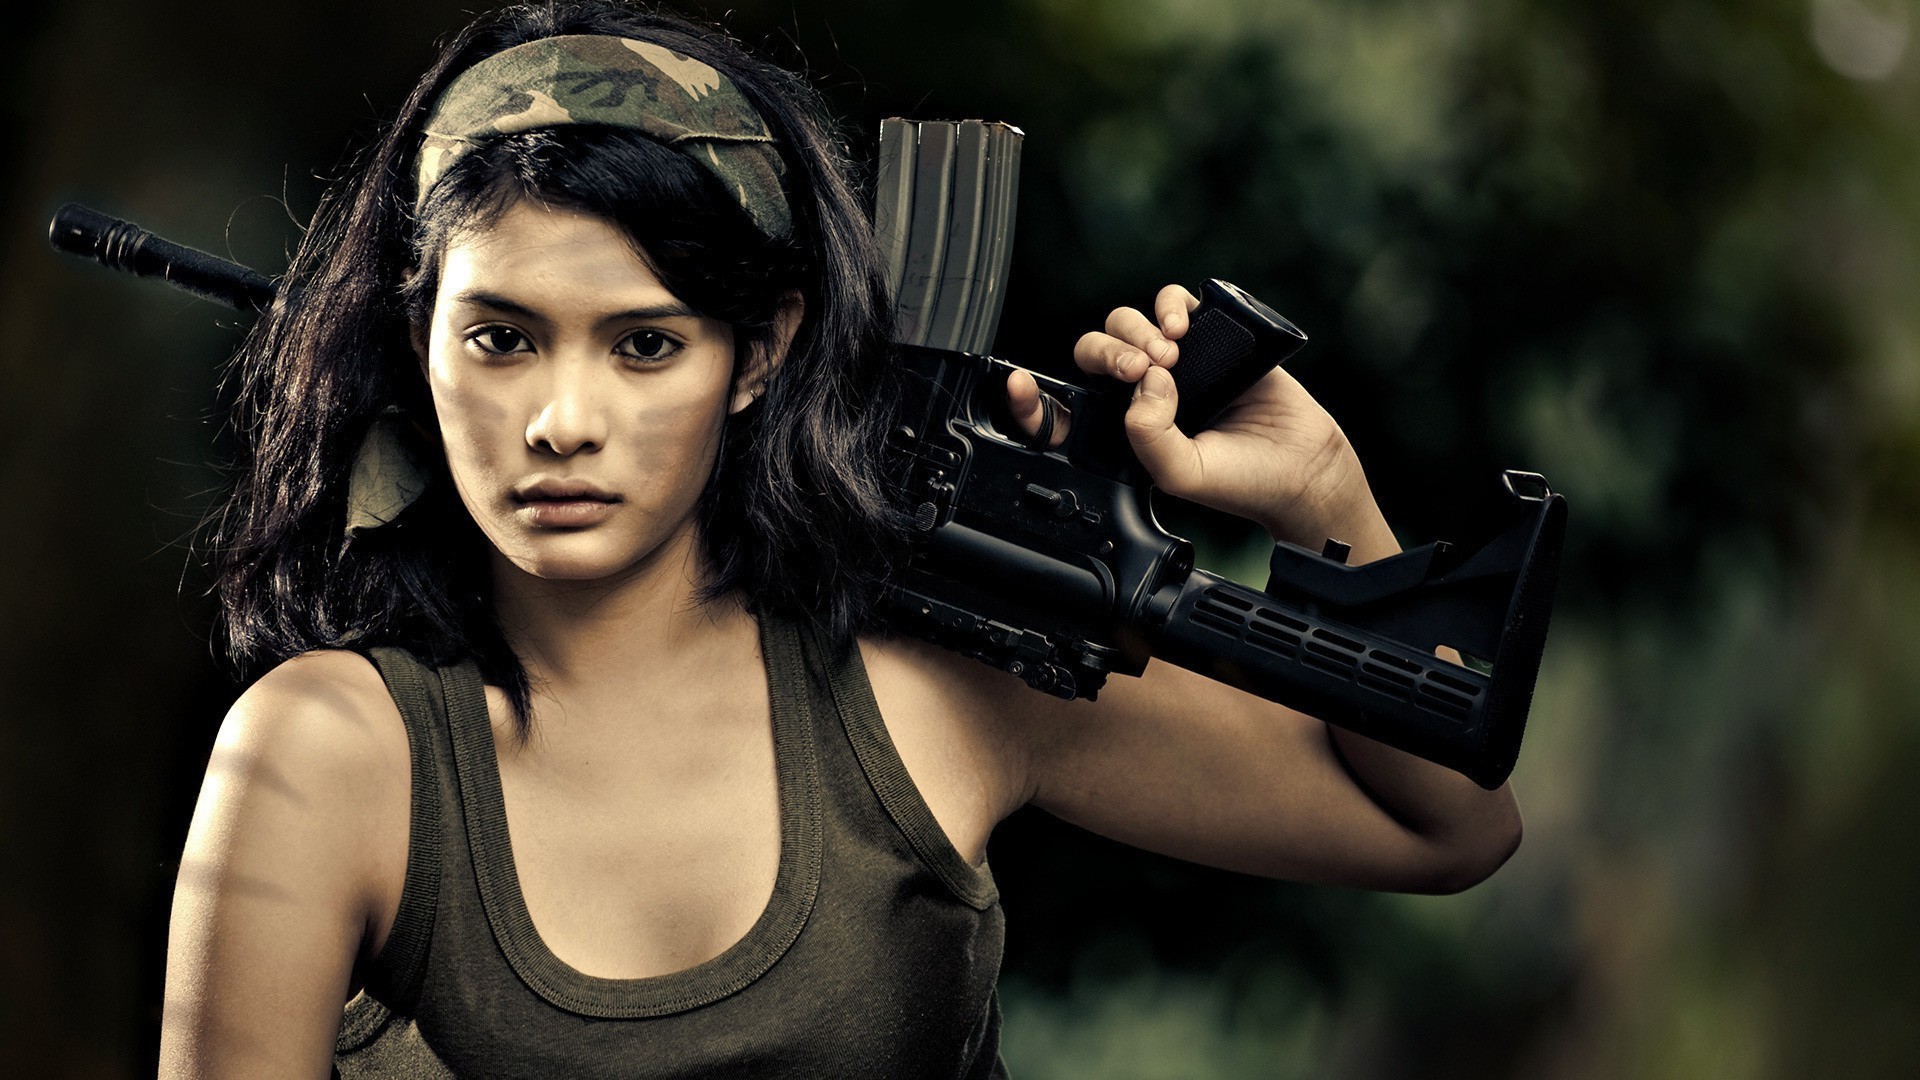 Army Girl With Gun HD Wallpaper New